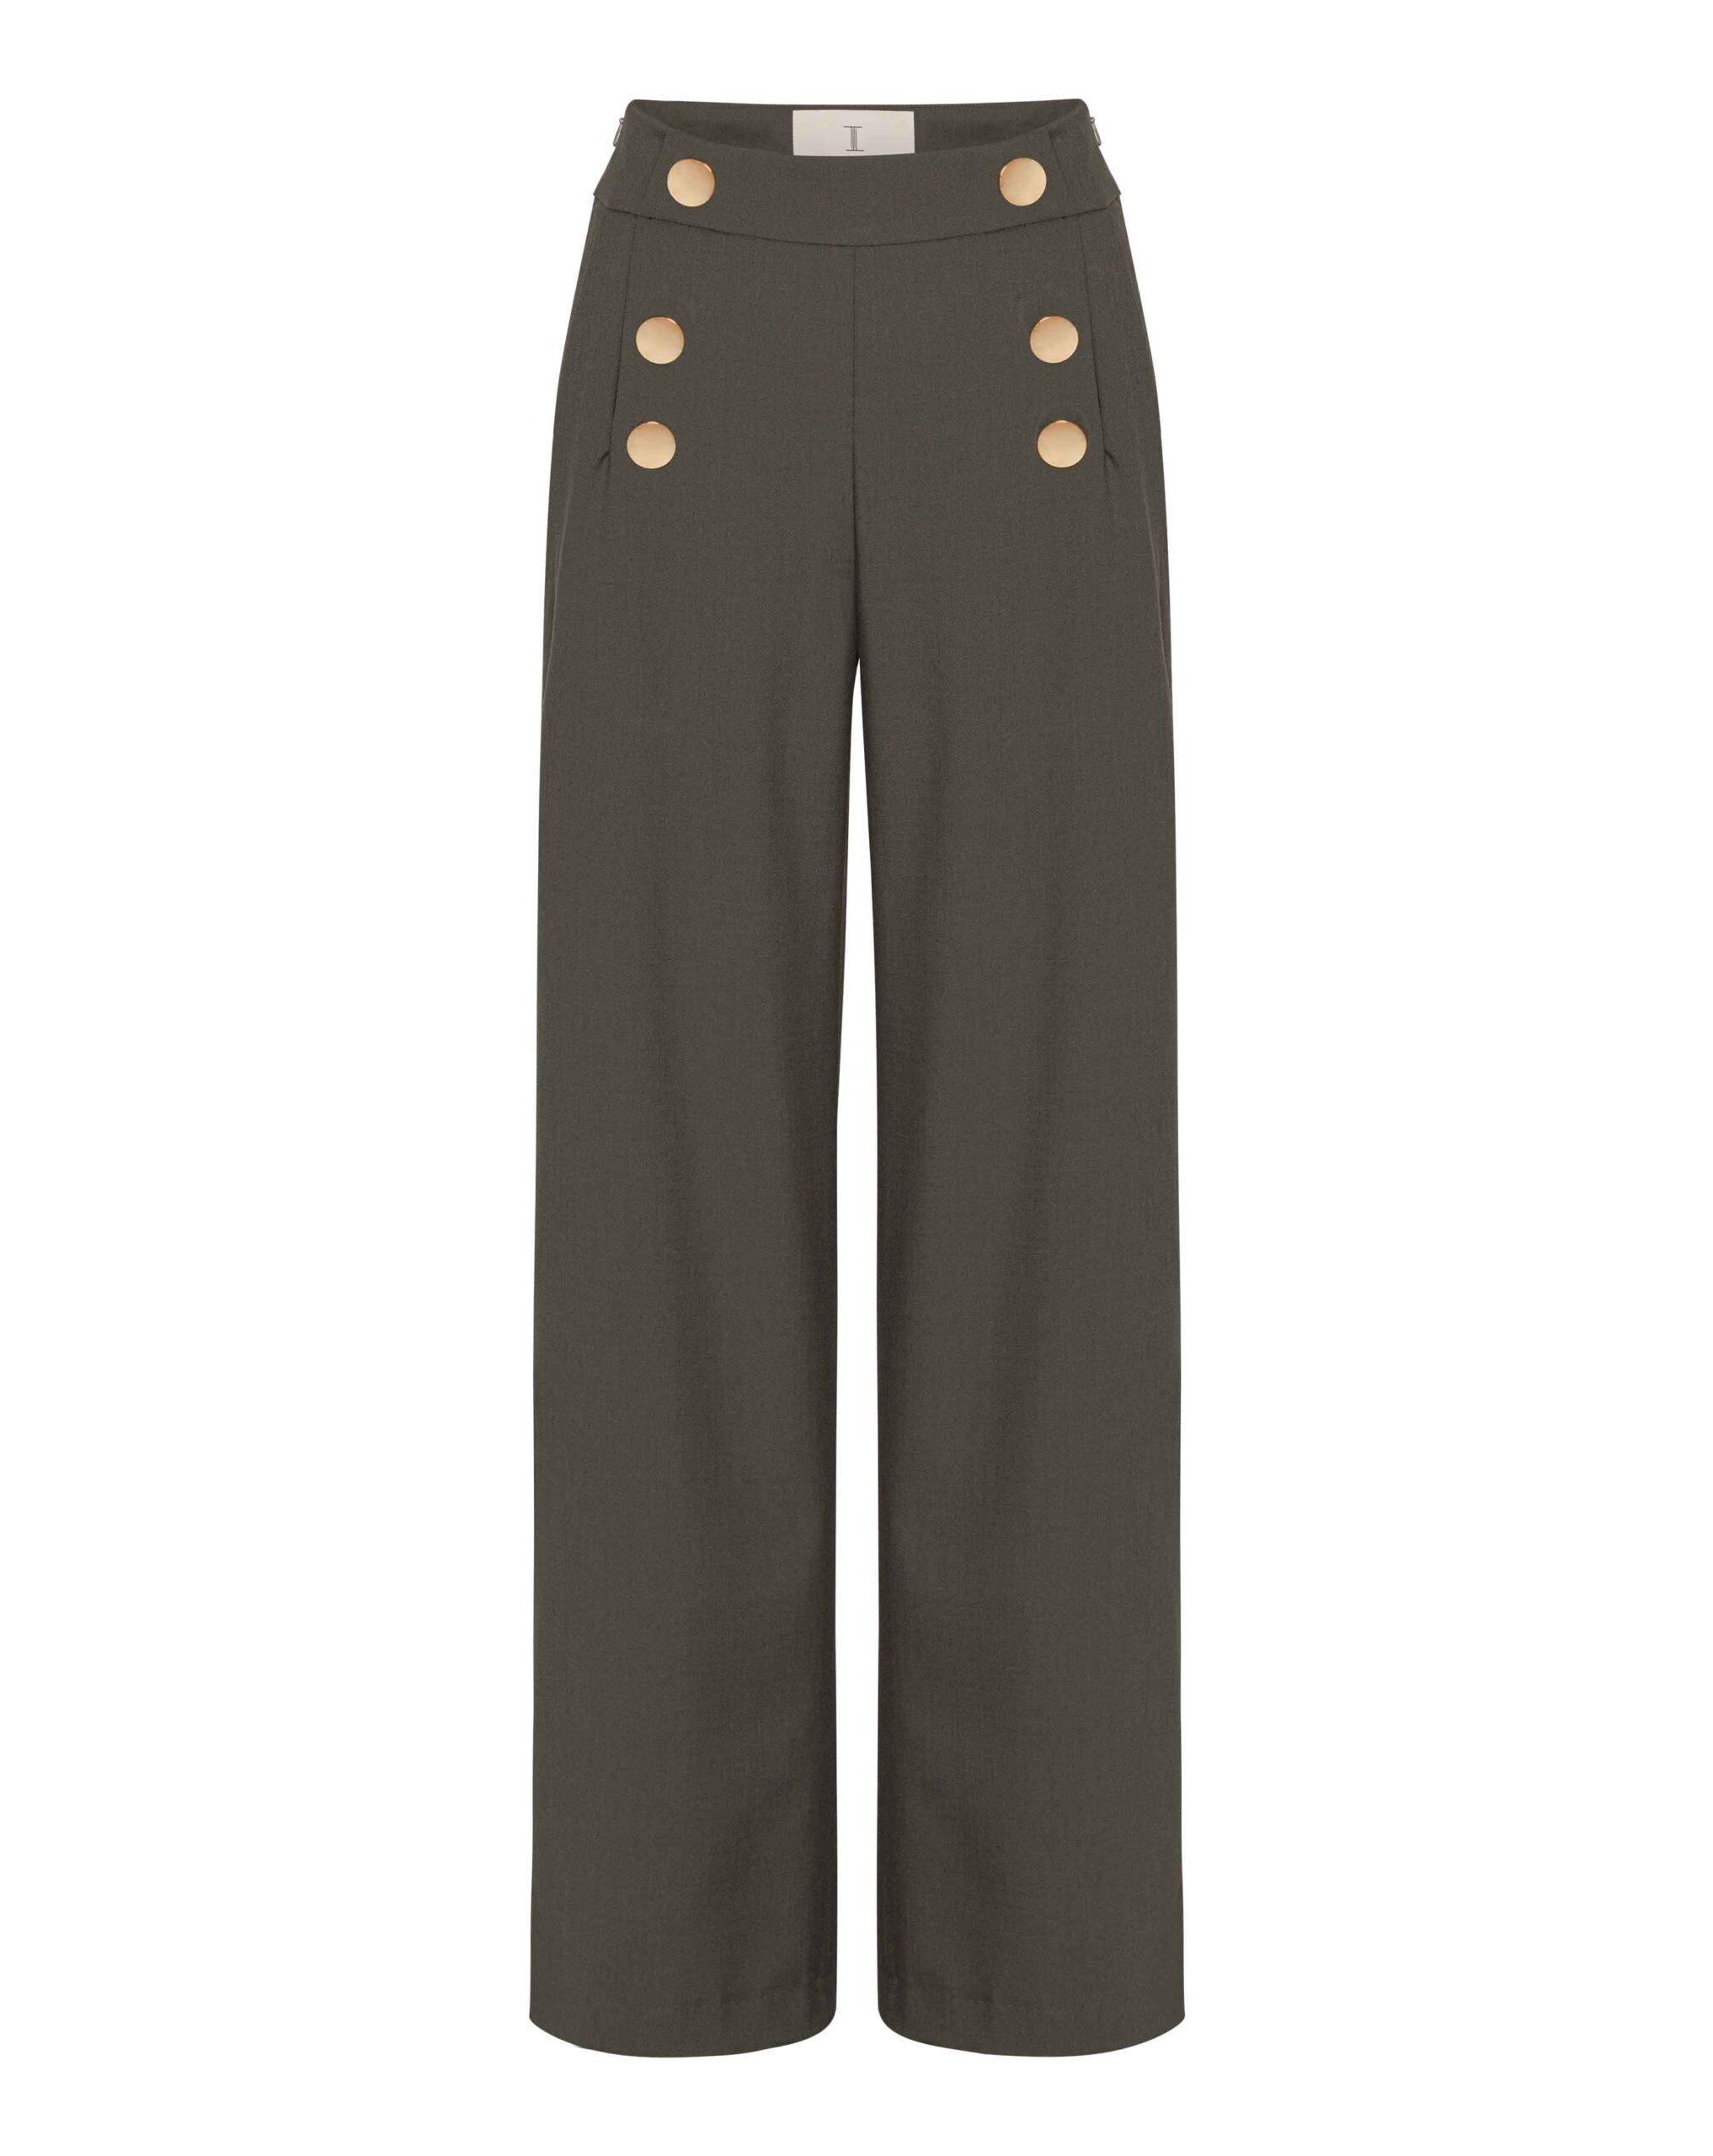 Army green Louise pants by Thi Thao Copenhagen